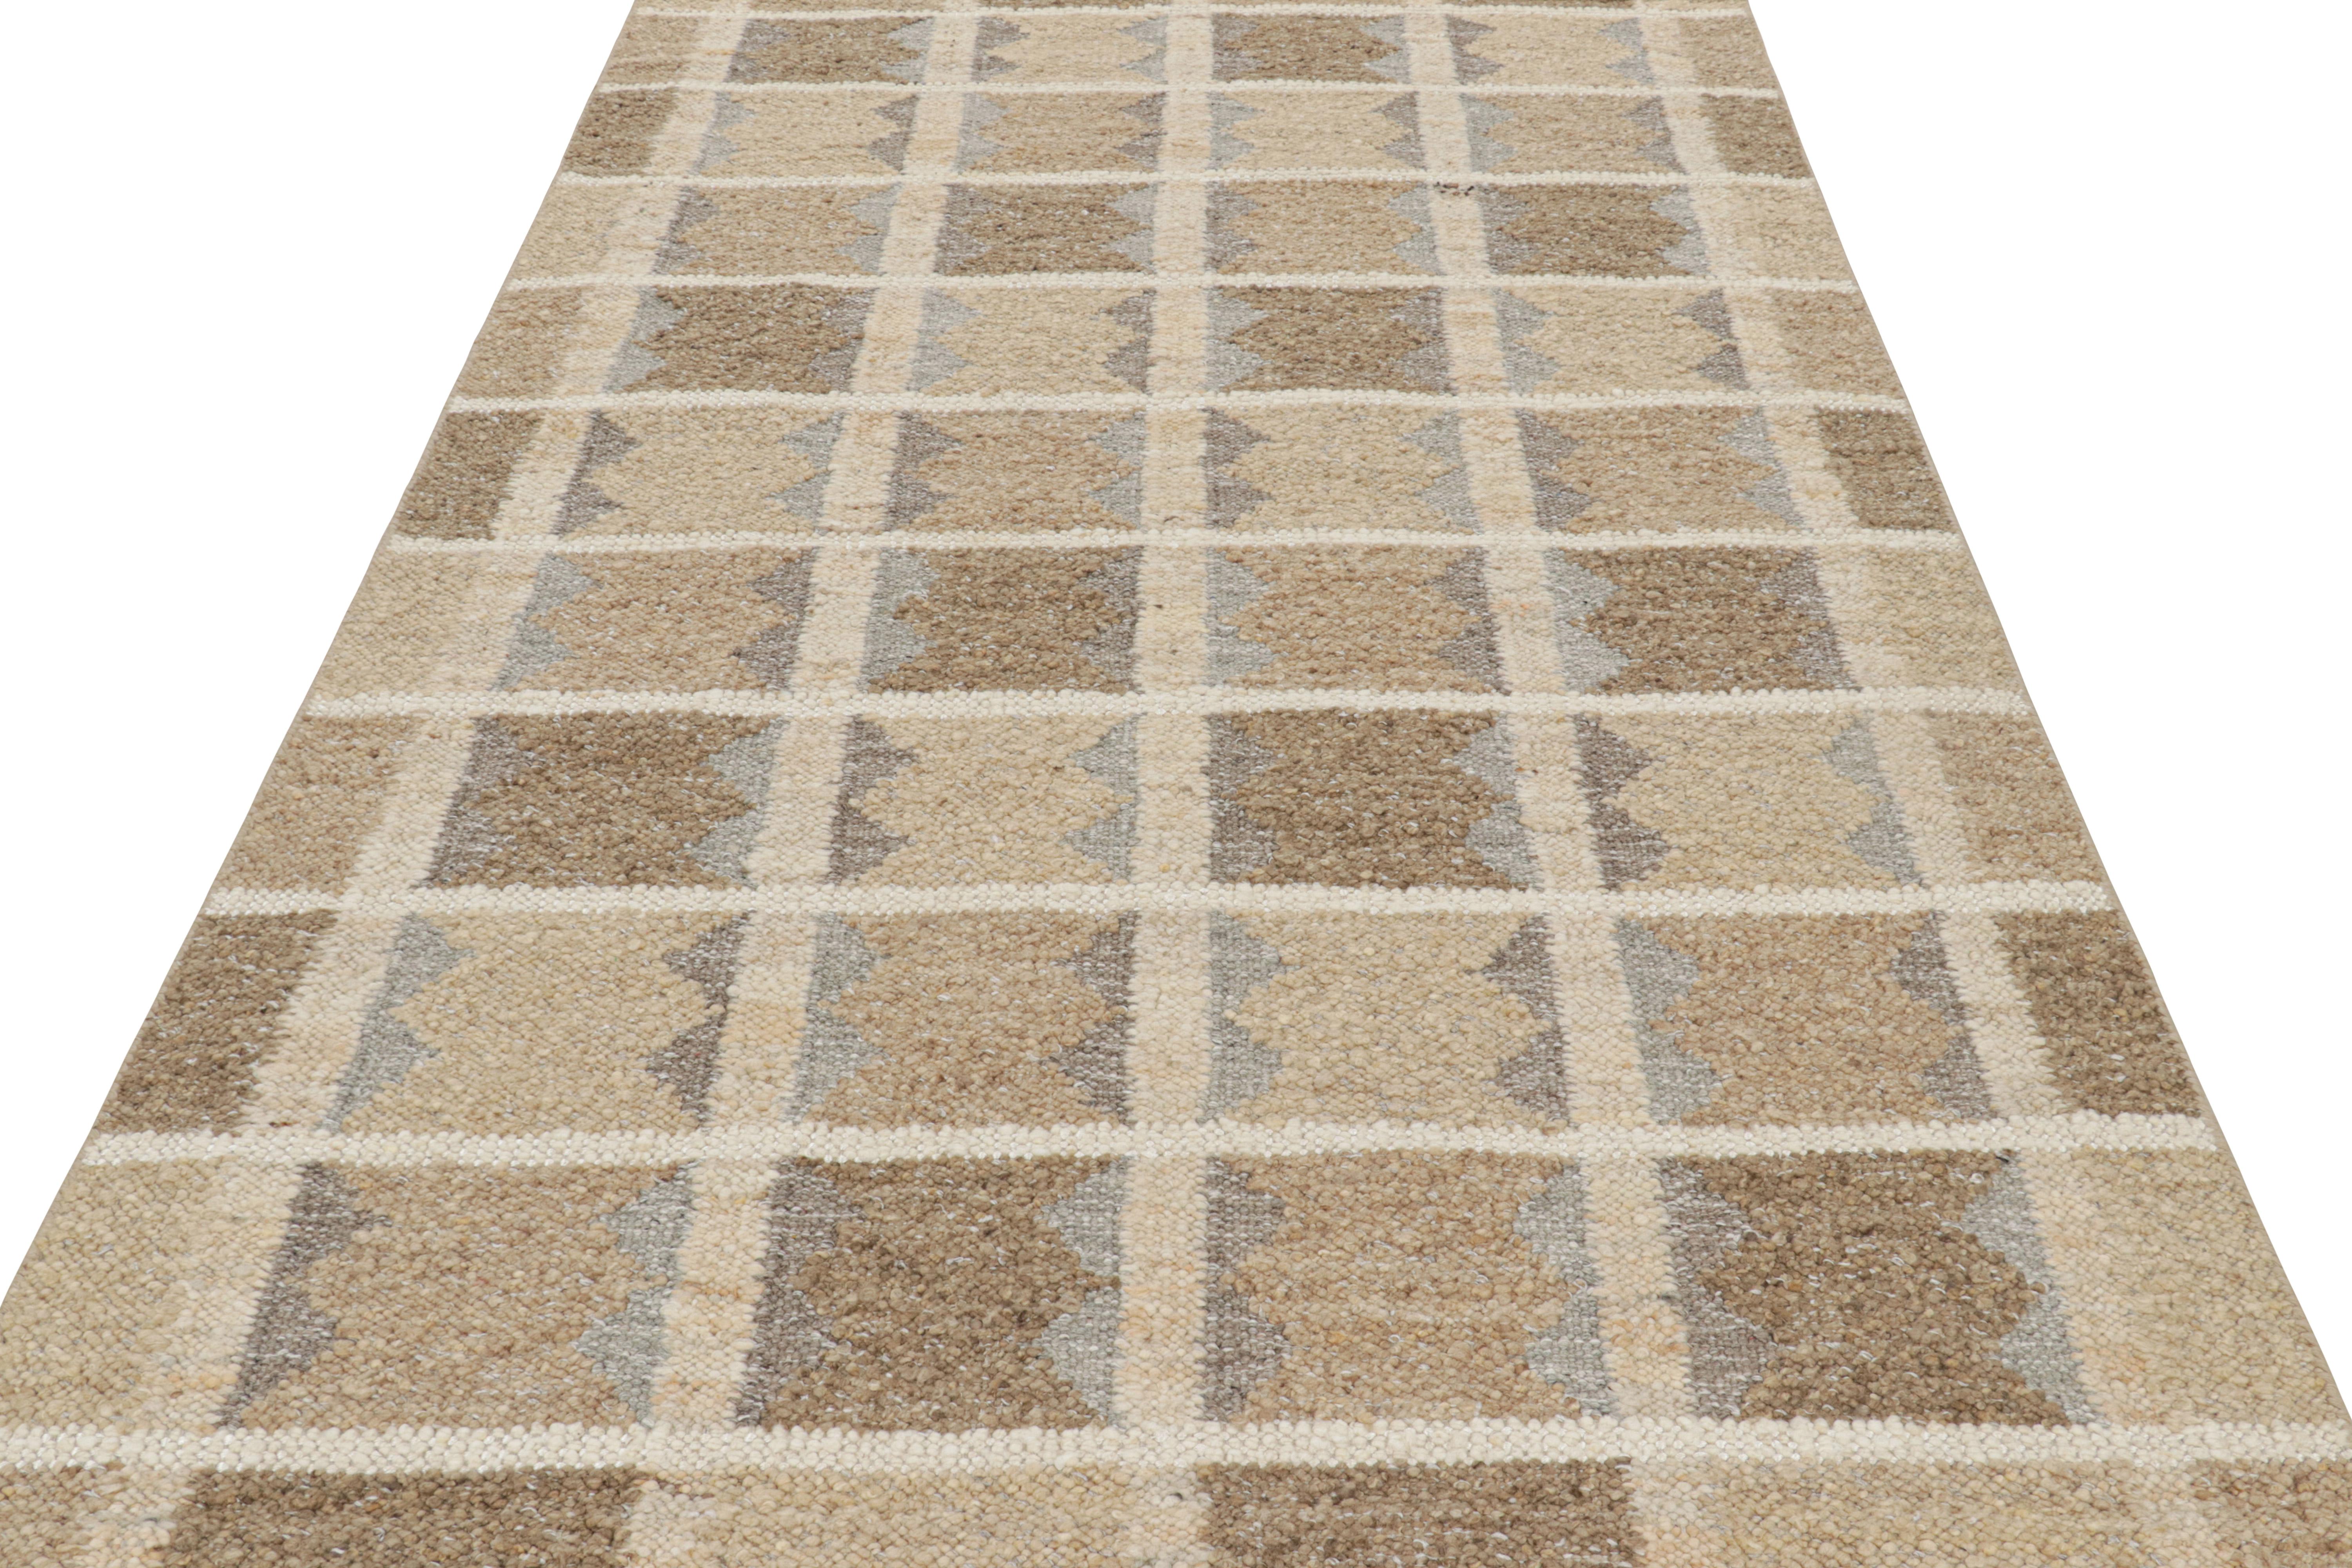 Hand-Woven Rug & Kilim’s Scandinavian Style Rug in Beige-Brown Geometric Patterns For Sale